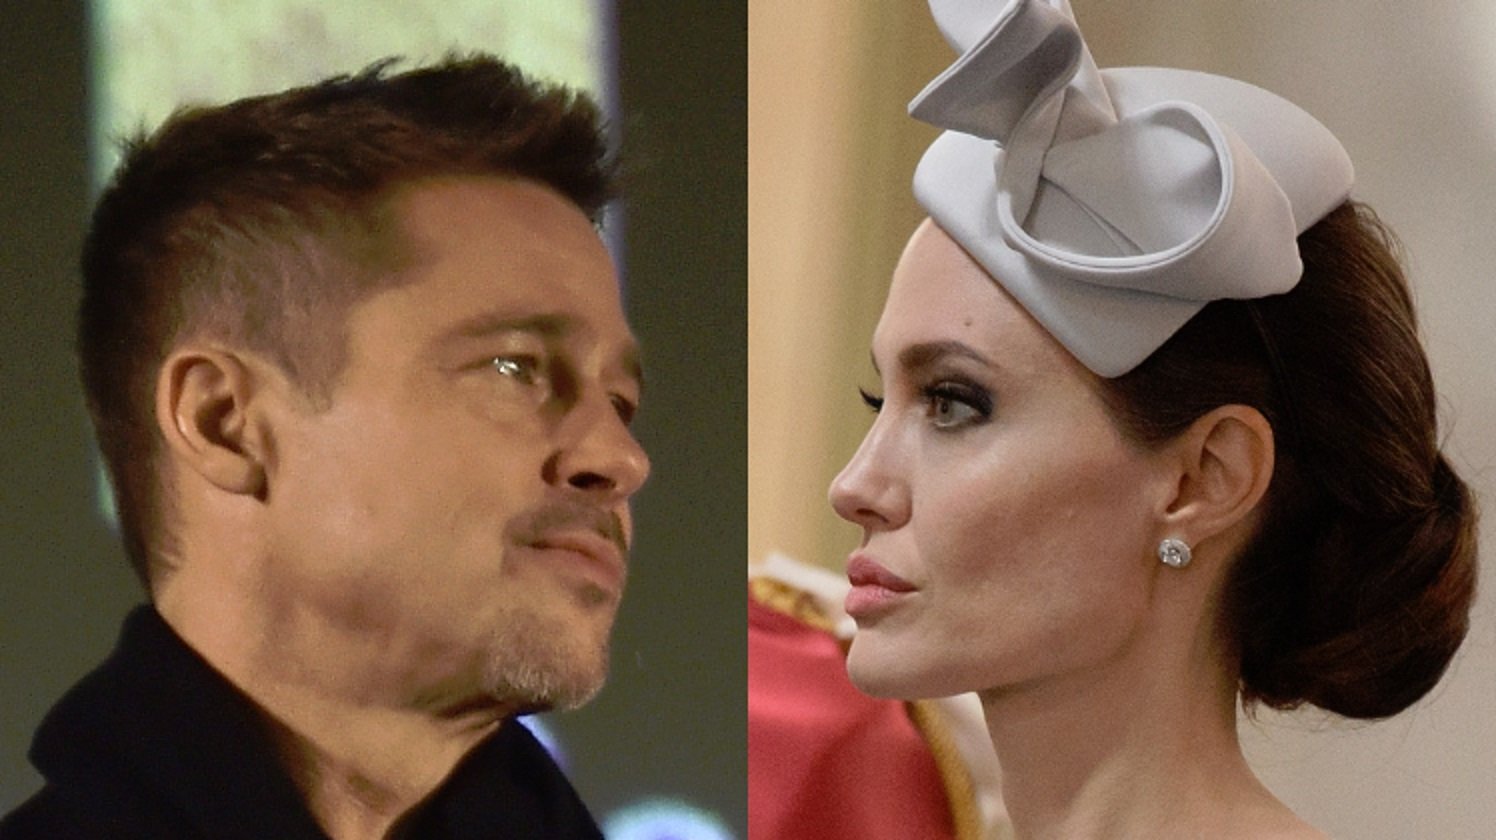 Jolie reveals Brad Pitt's sexual abuse allegations in court3